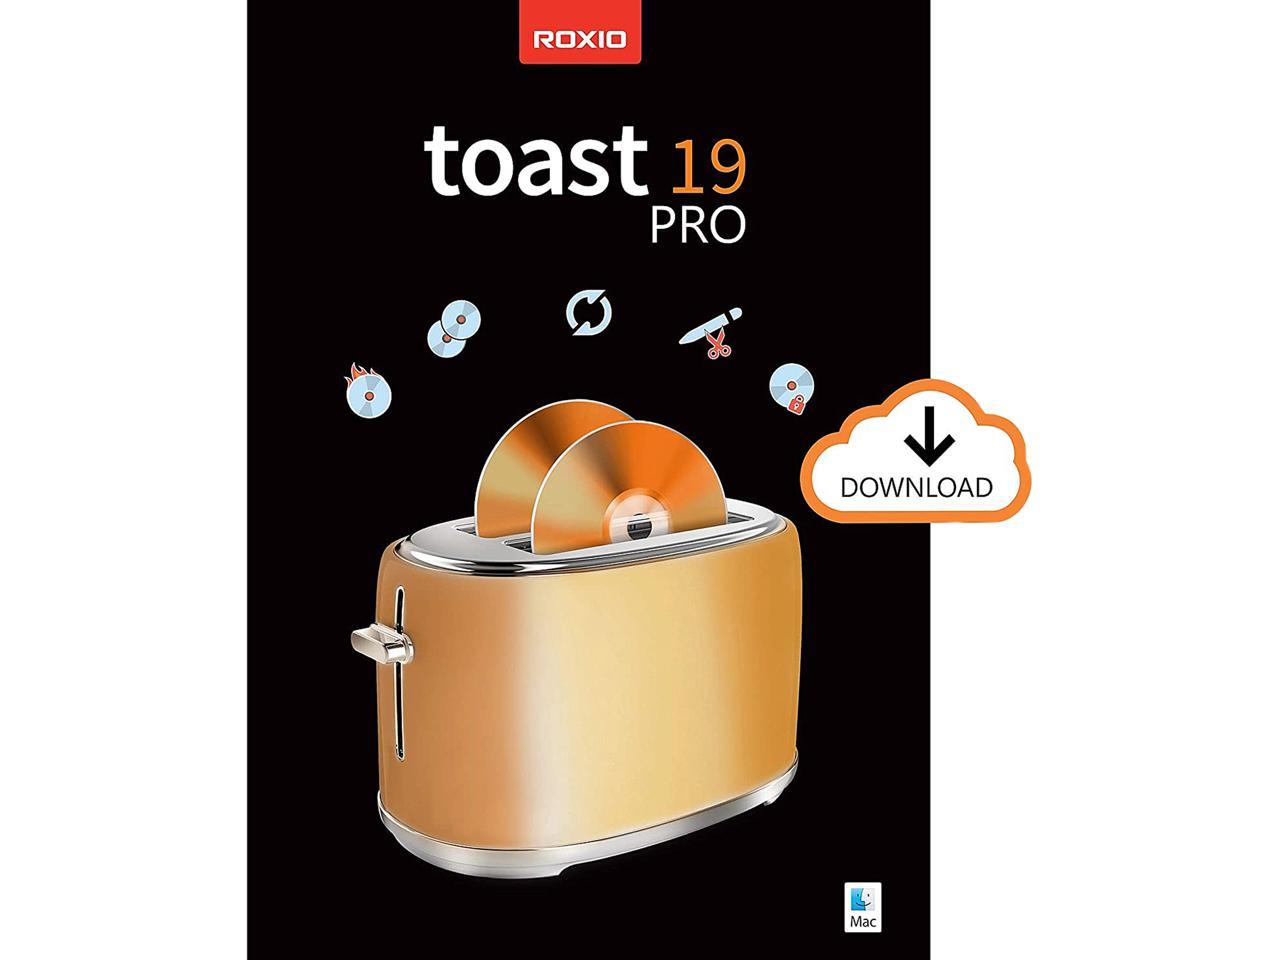 roxio toast for mac free download